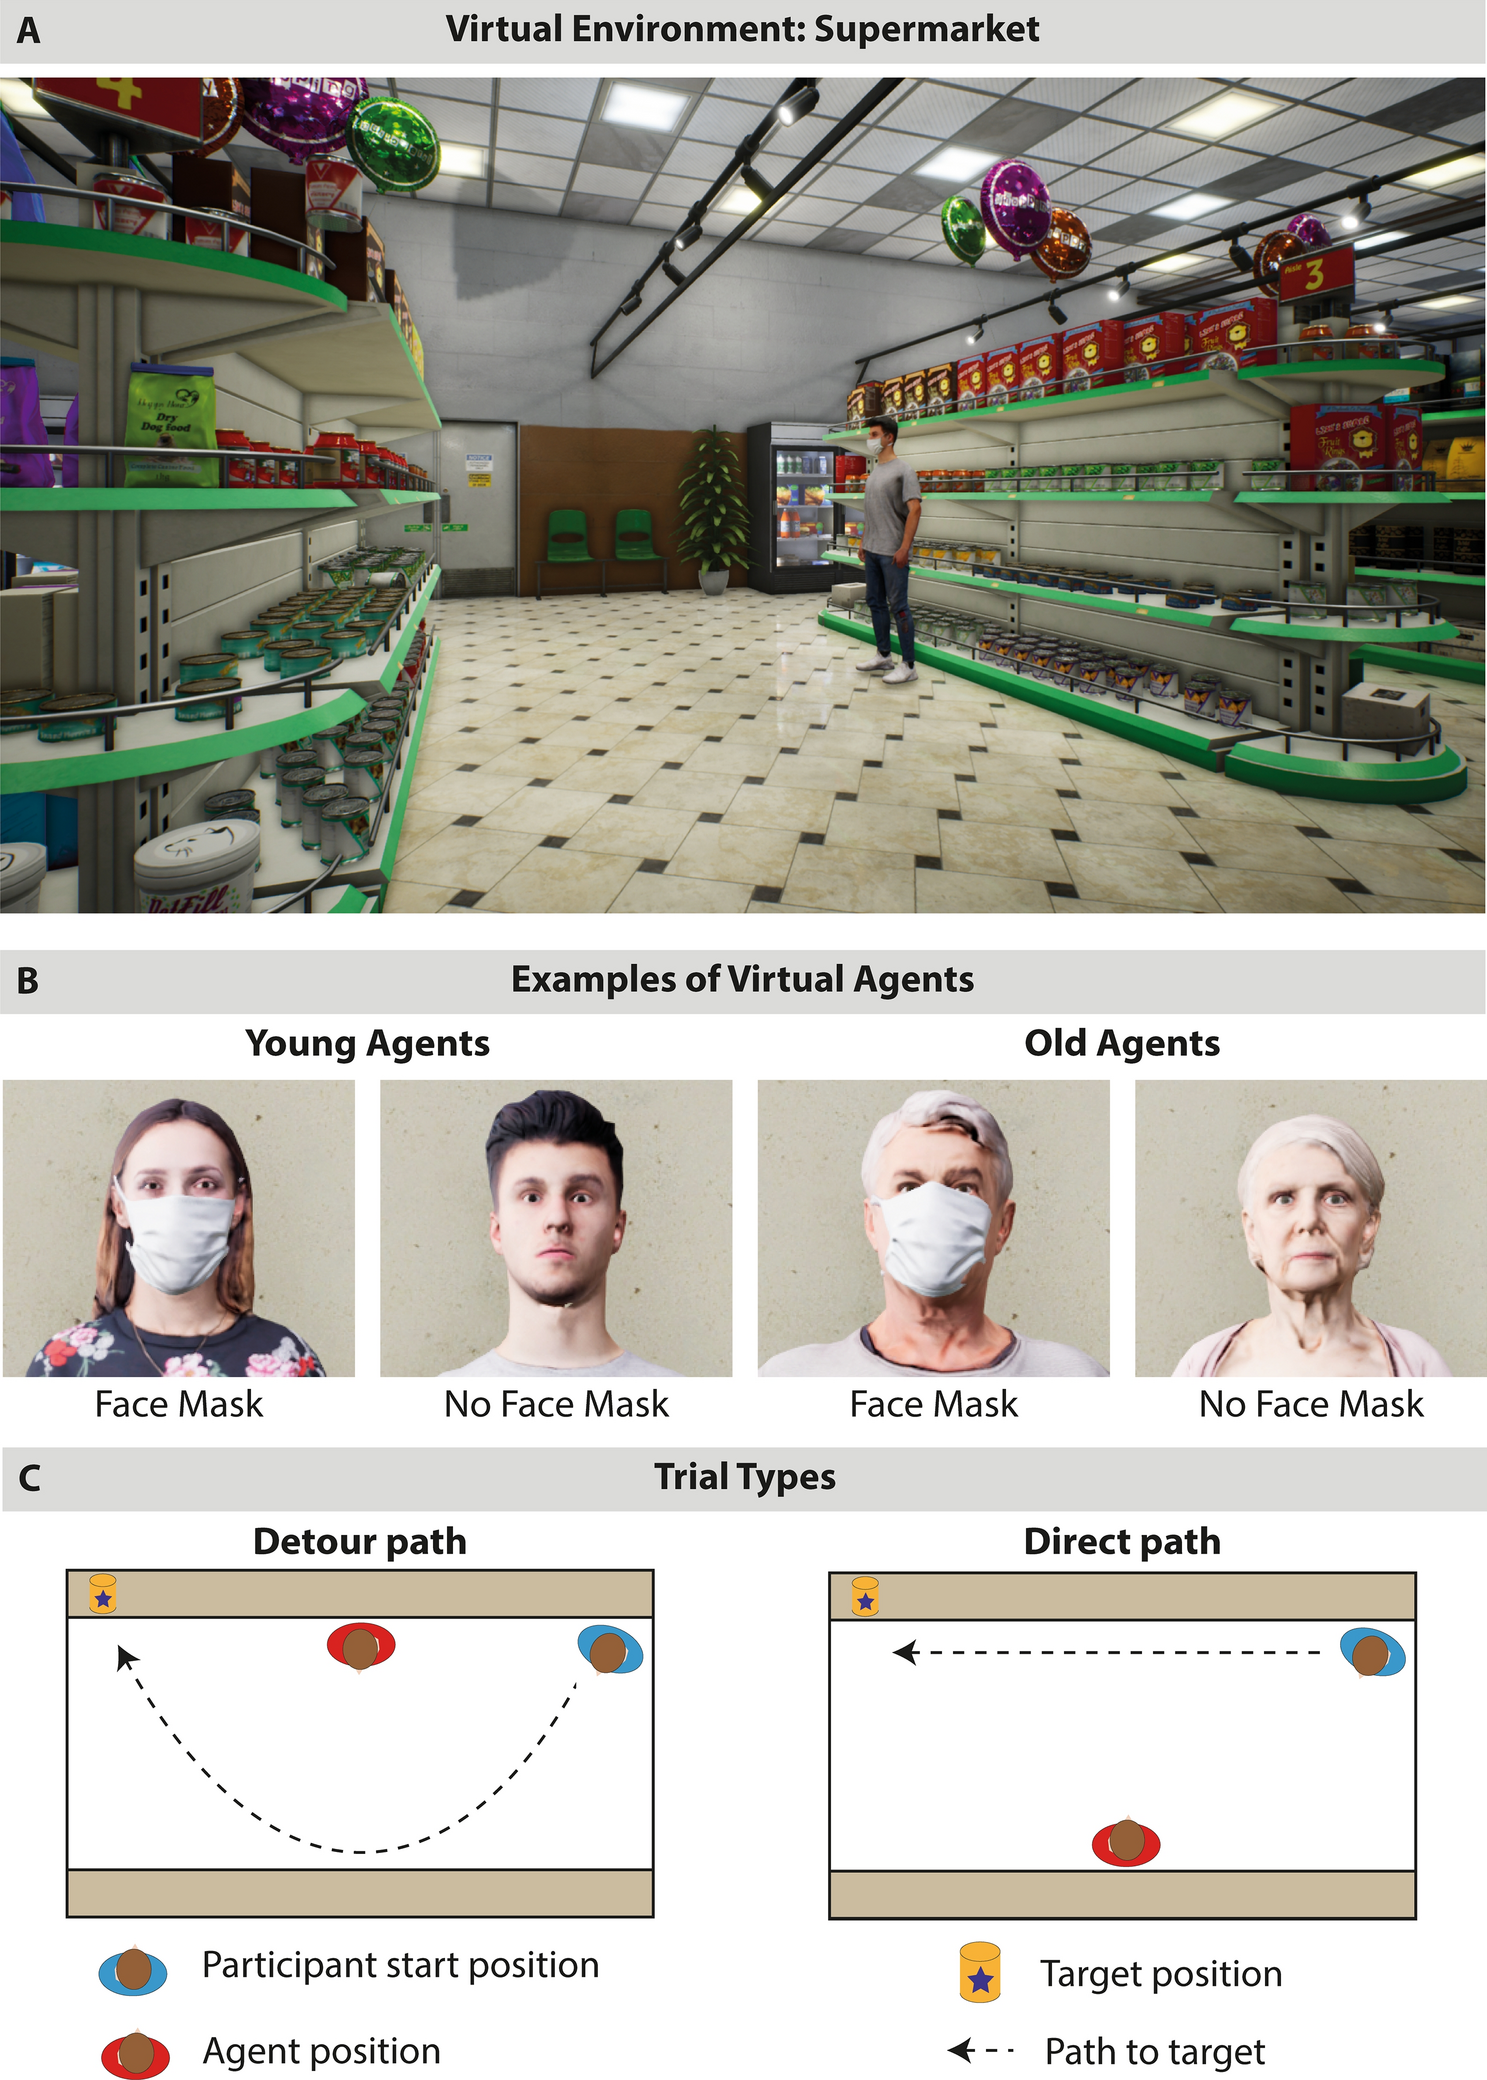 Face masks reduce interpersonal distance in virtual reality Scientific Reports pic